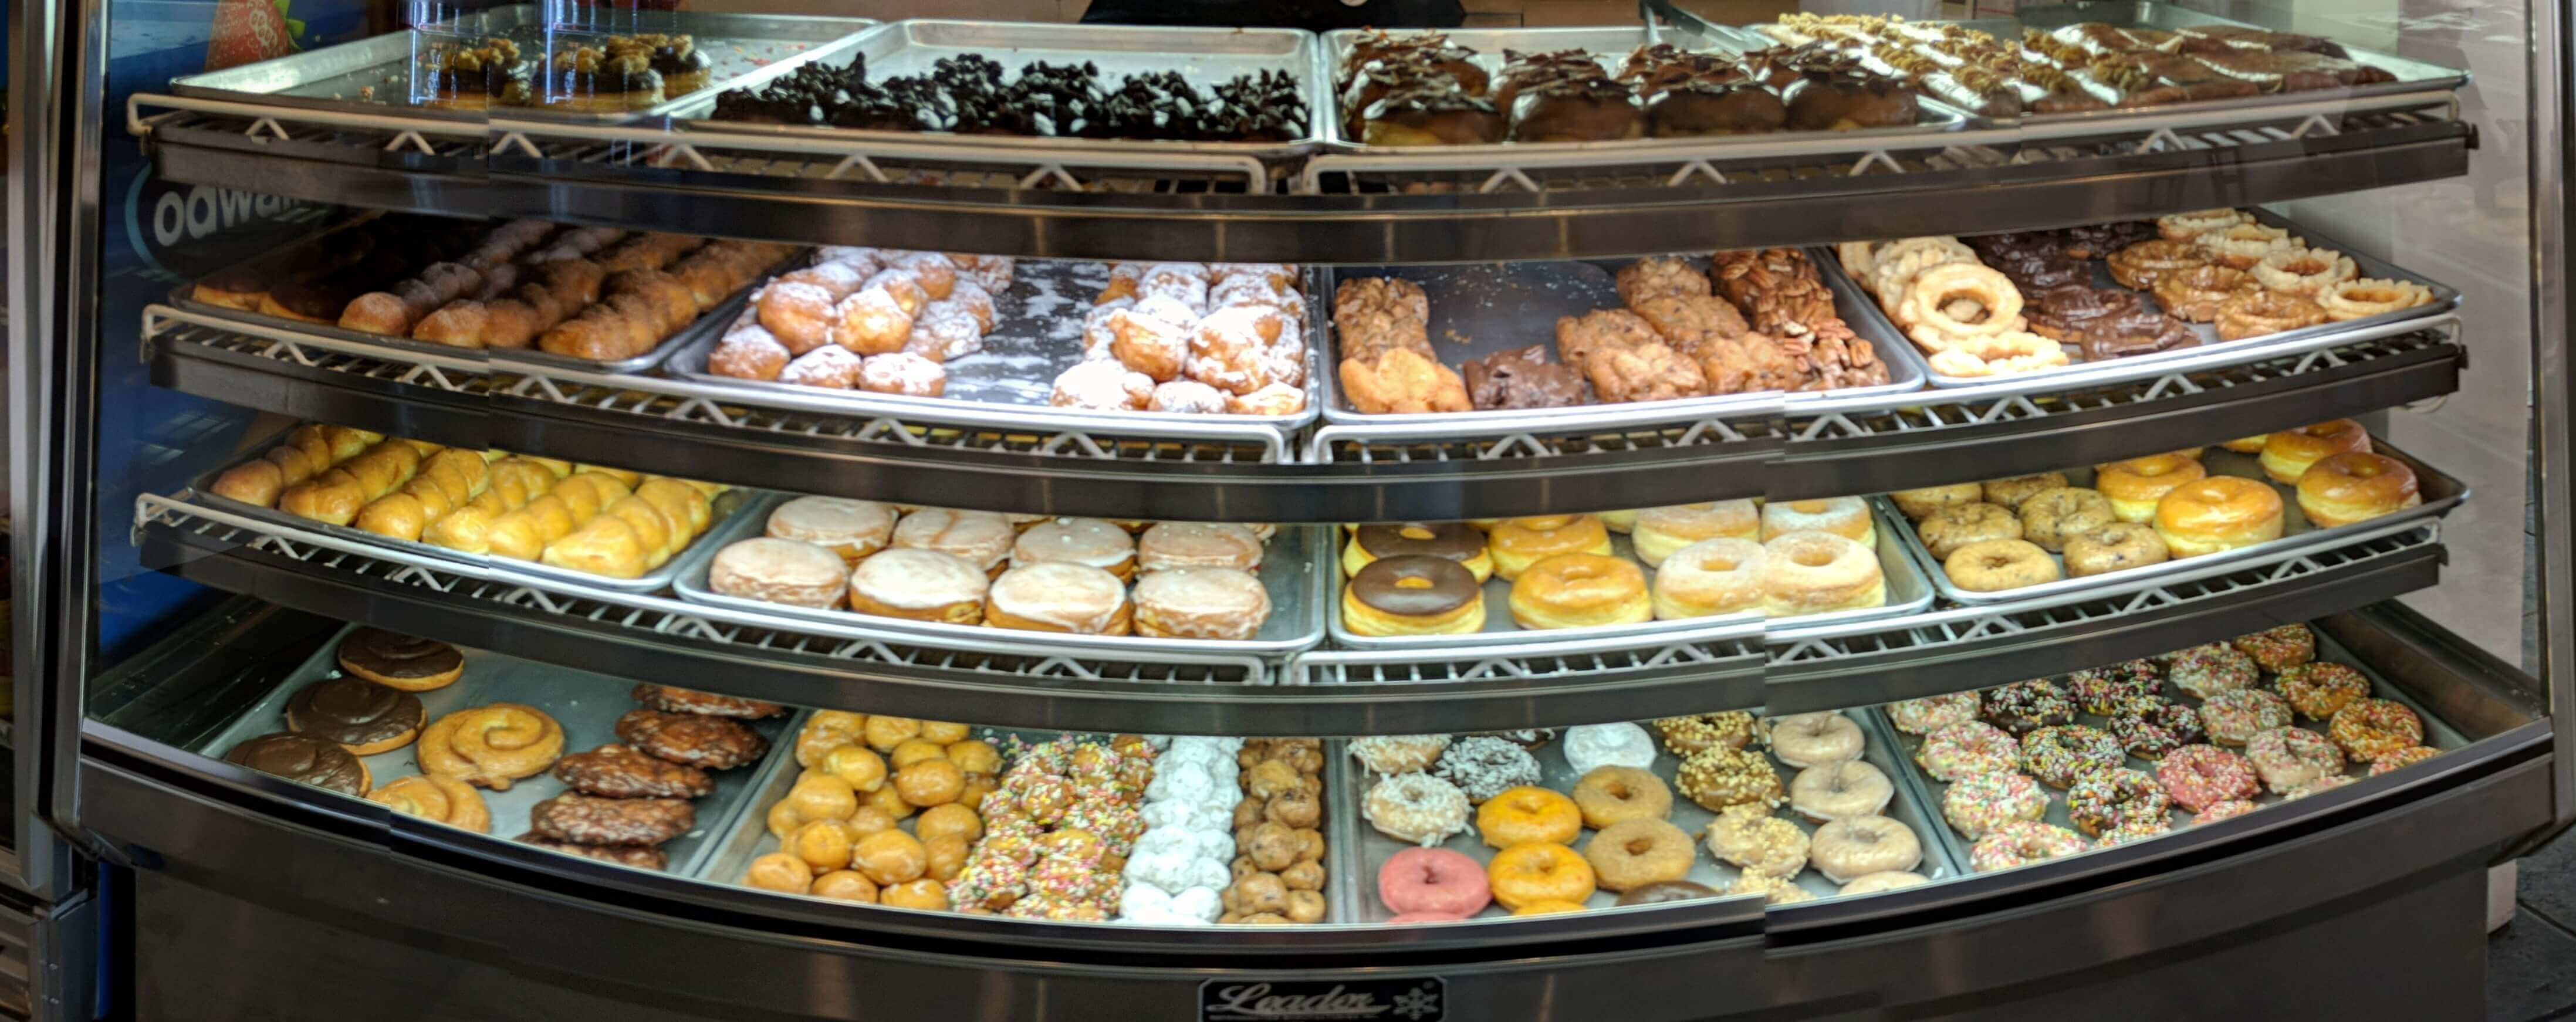 A glass display case filled with a variety of glazed donuts.